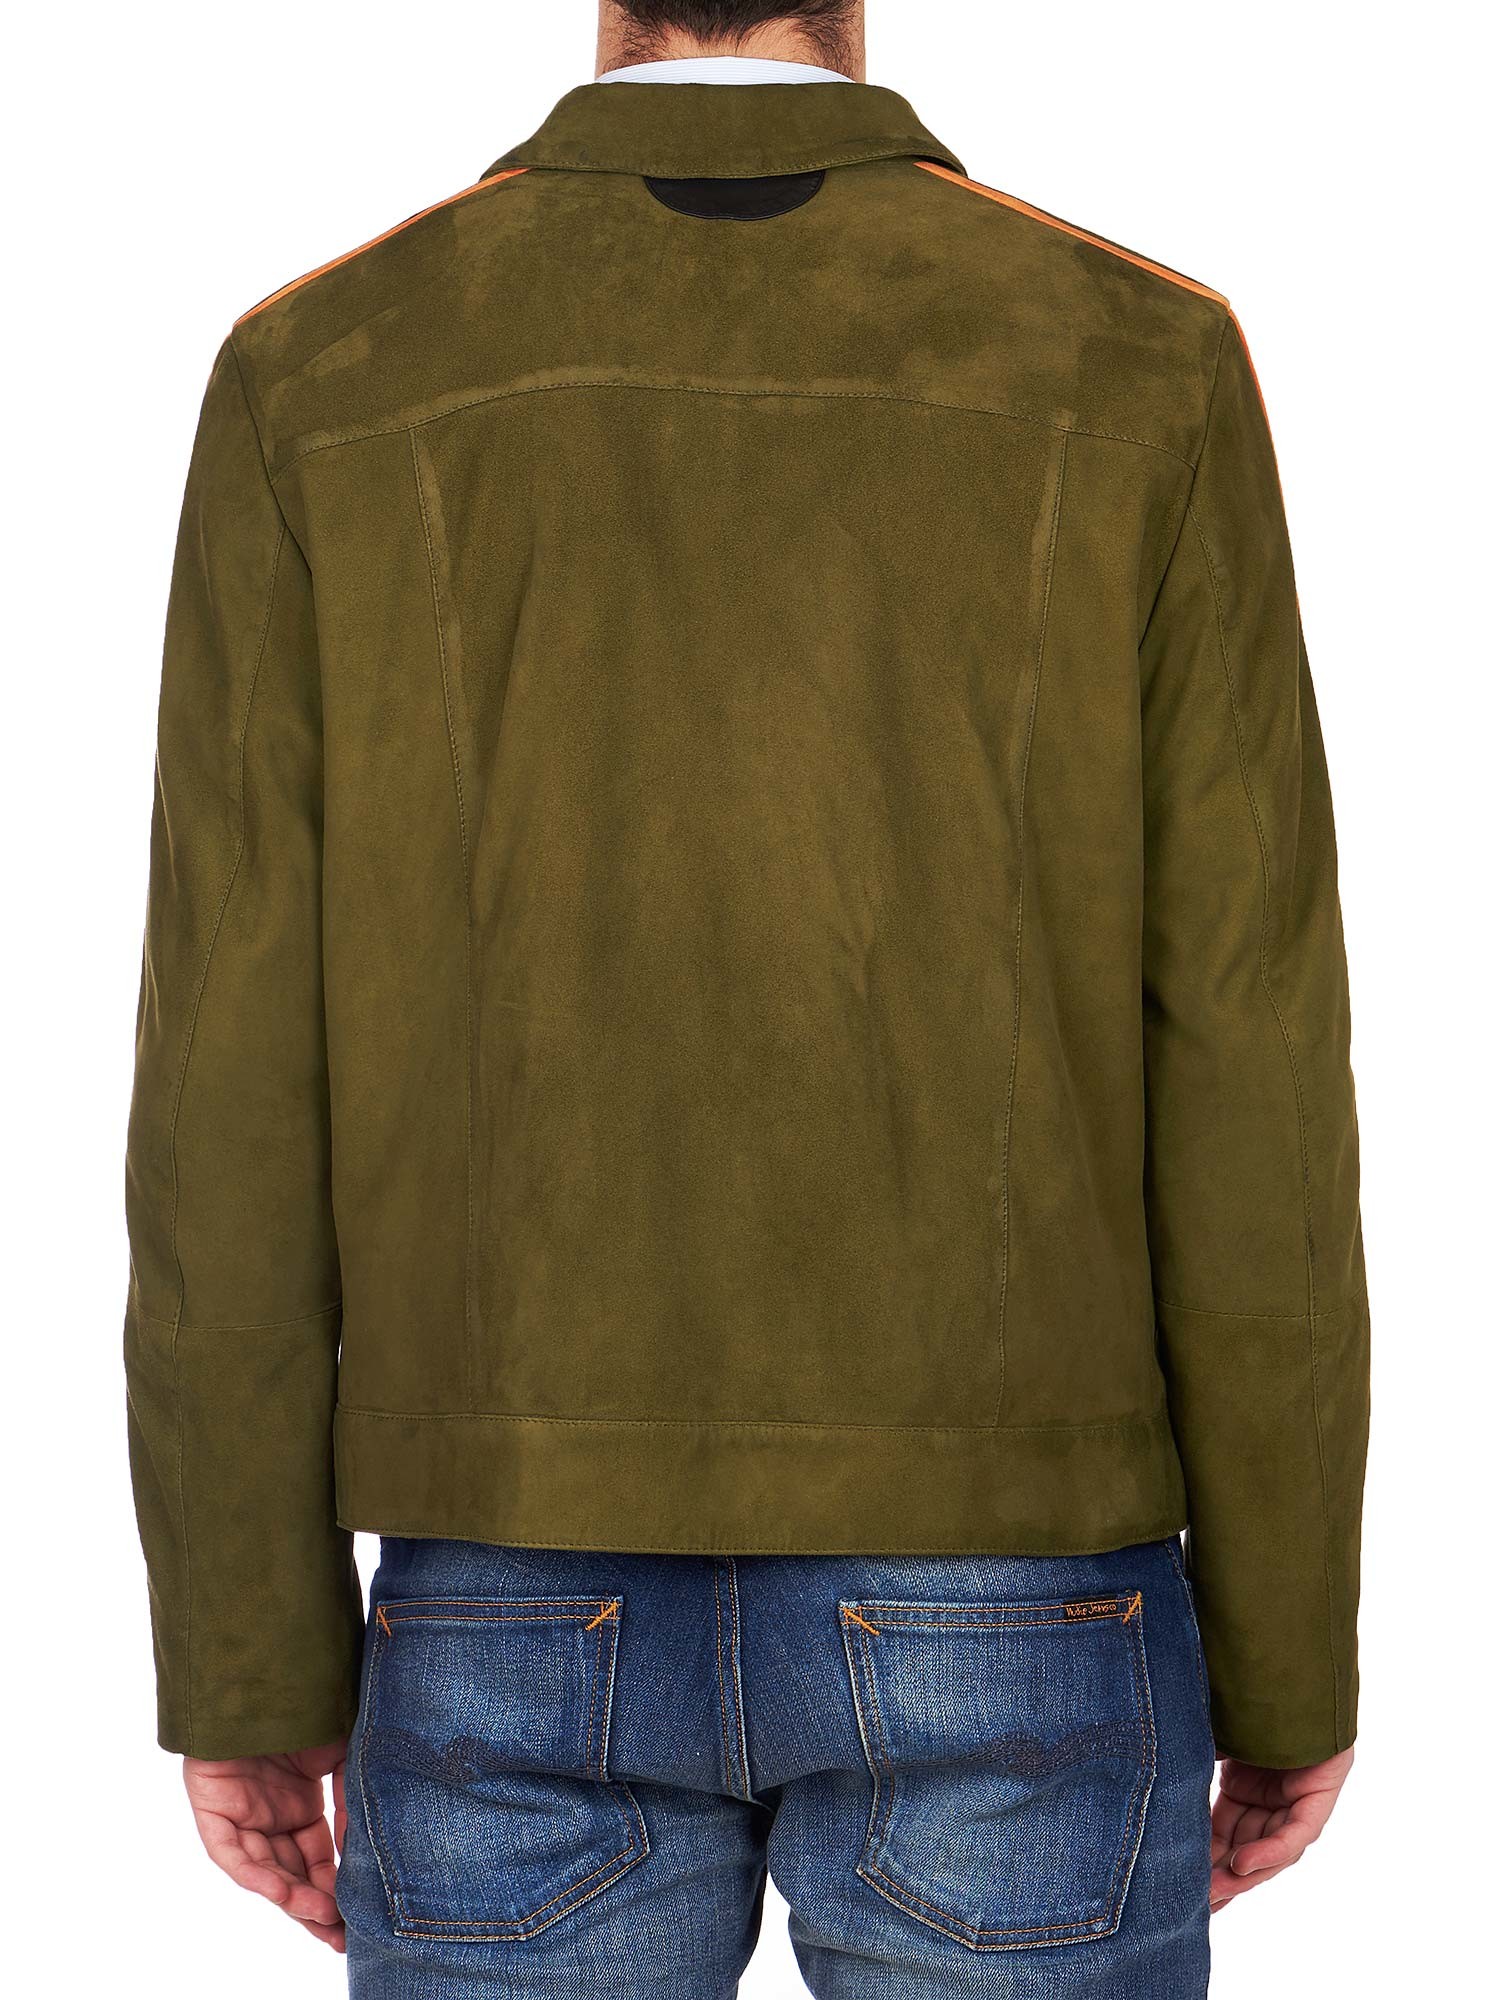 STRA - men's military green suede jacket